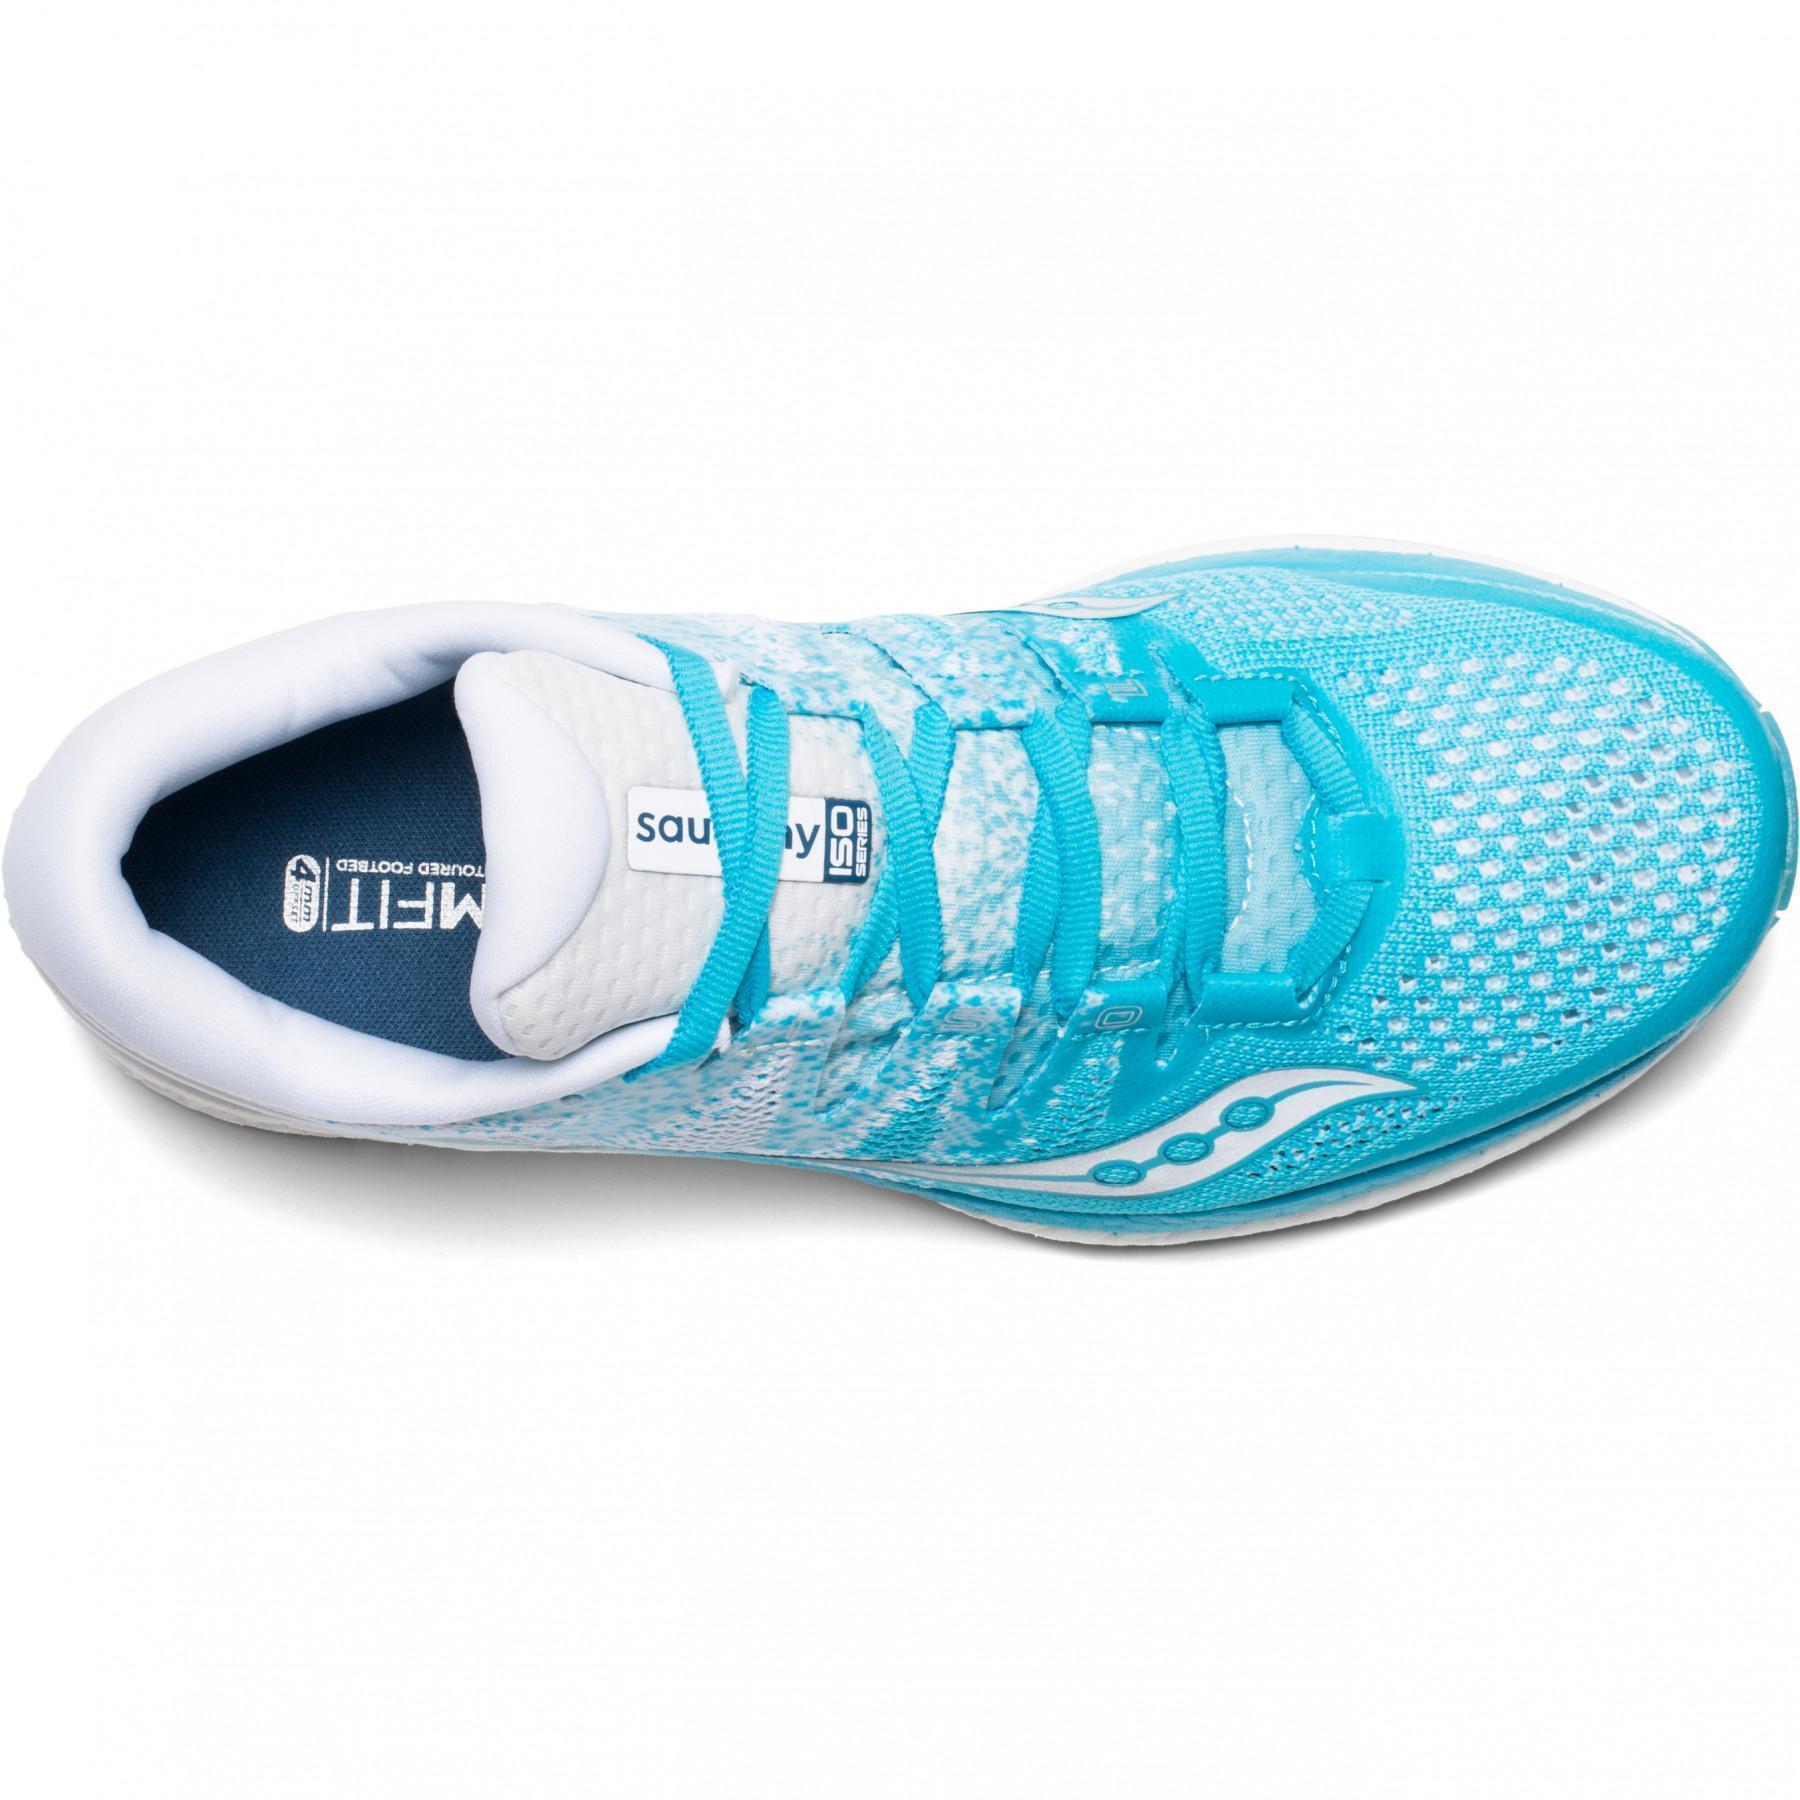 Women's shoes Saucony Freedom ISO 2